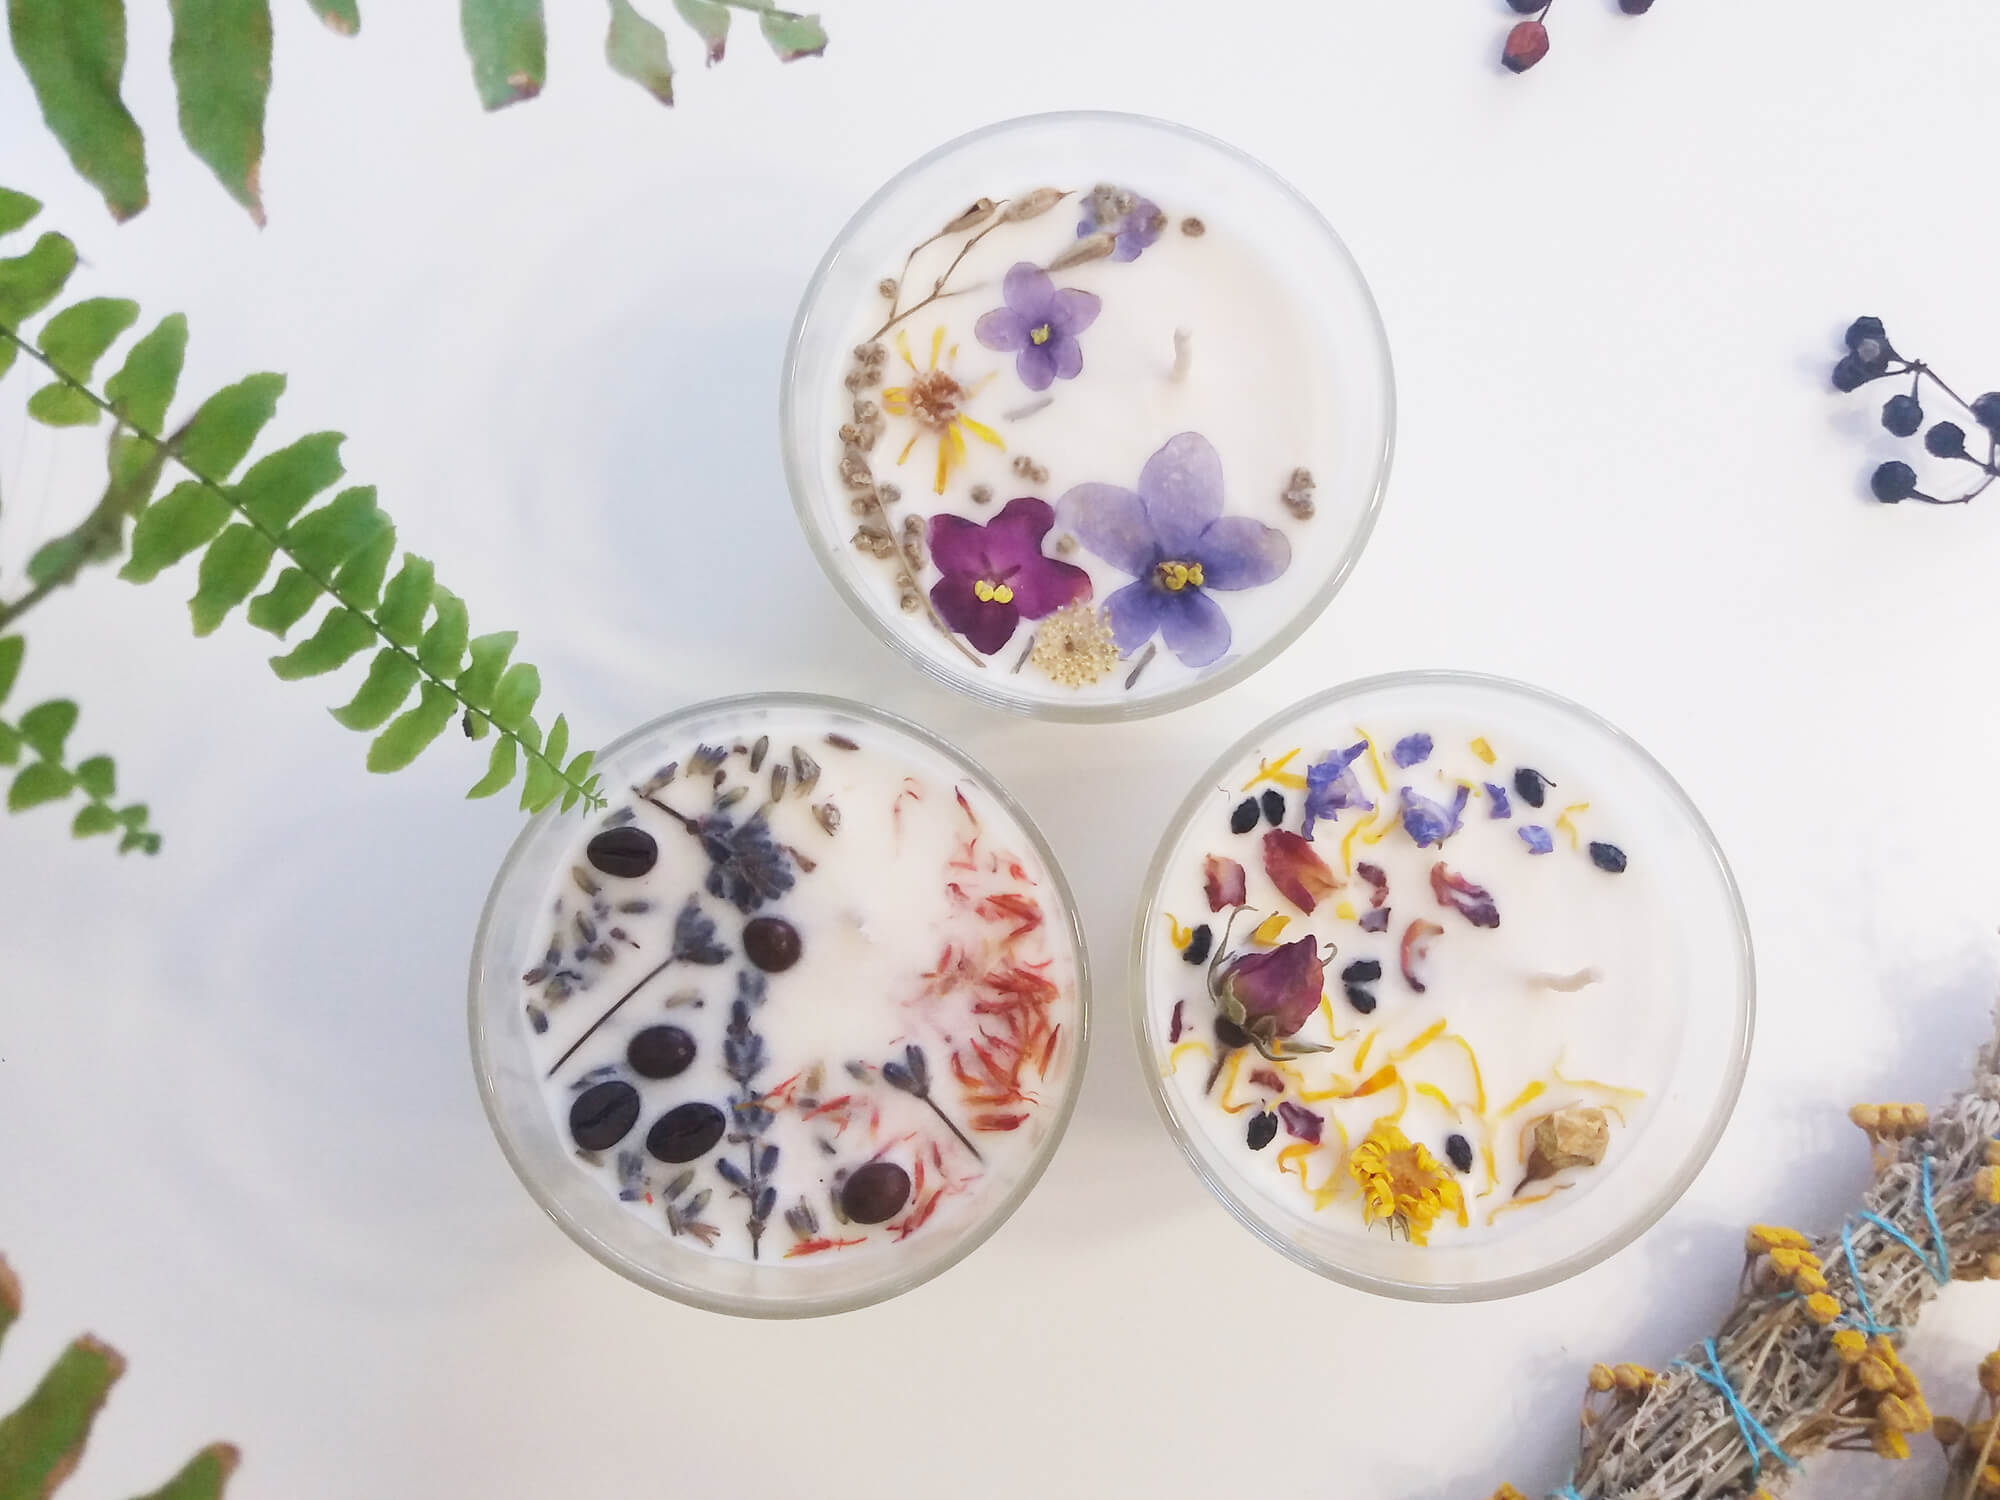 Dried flower candles